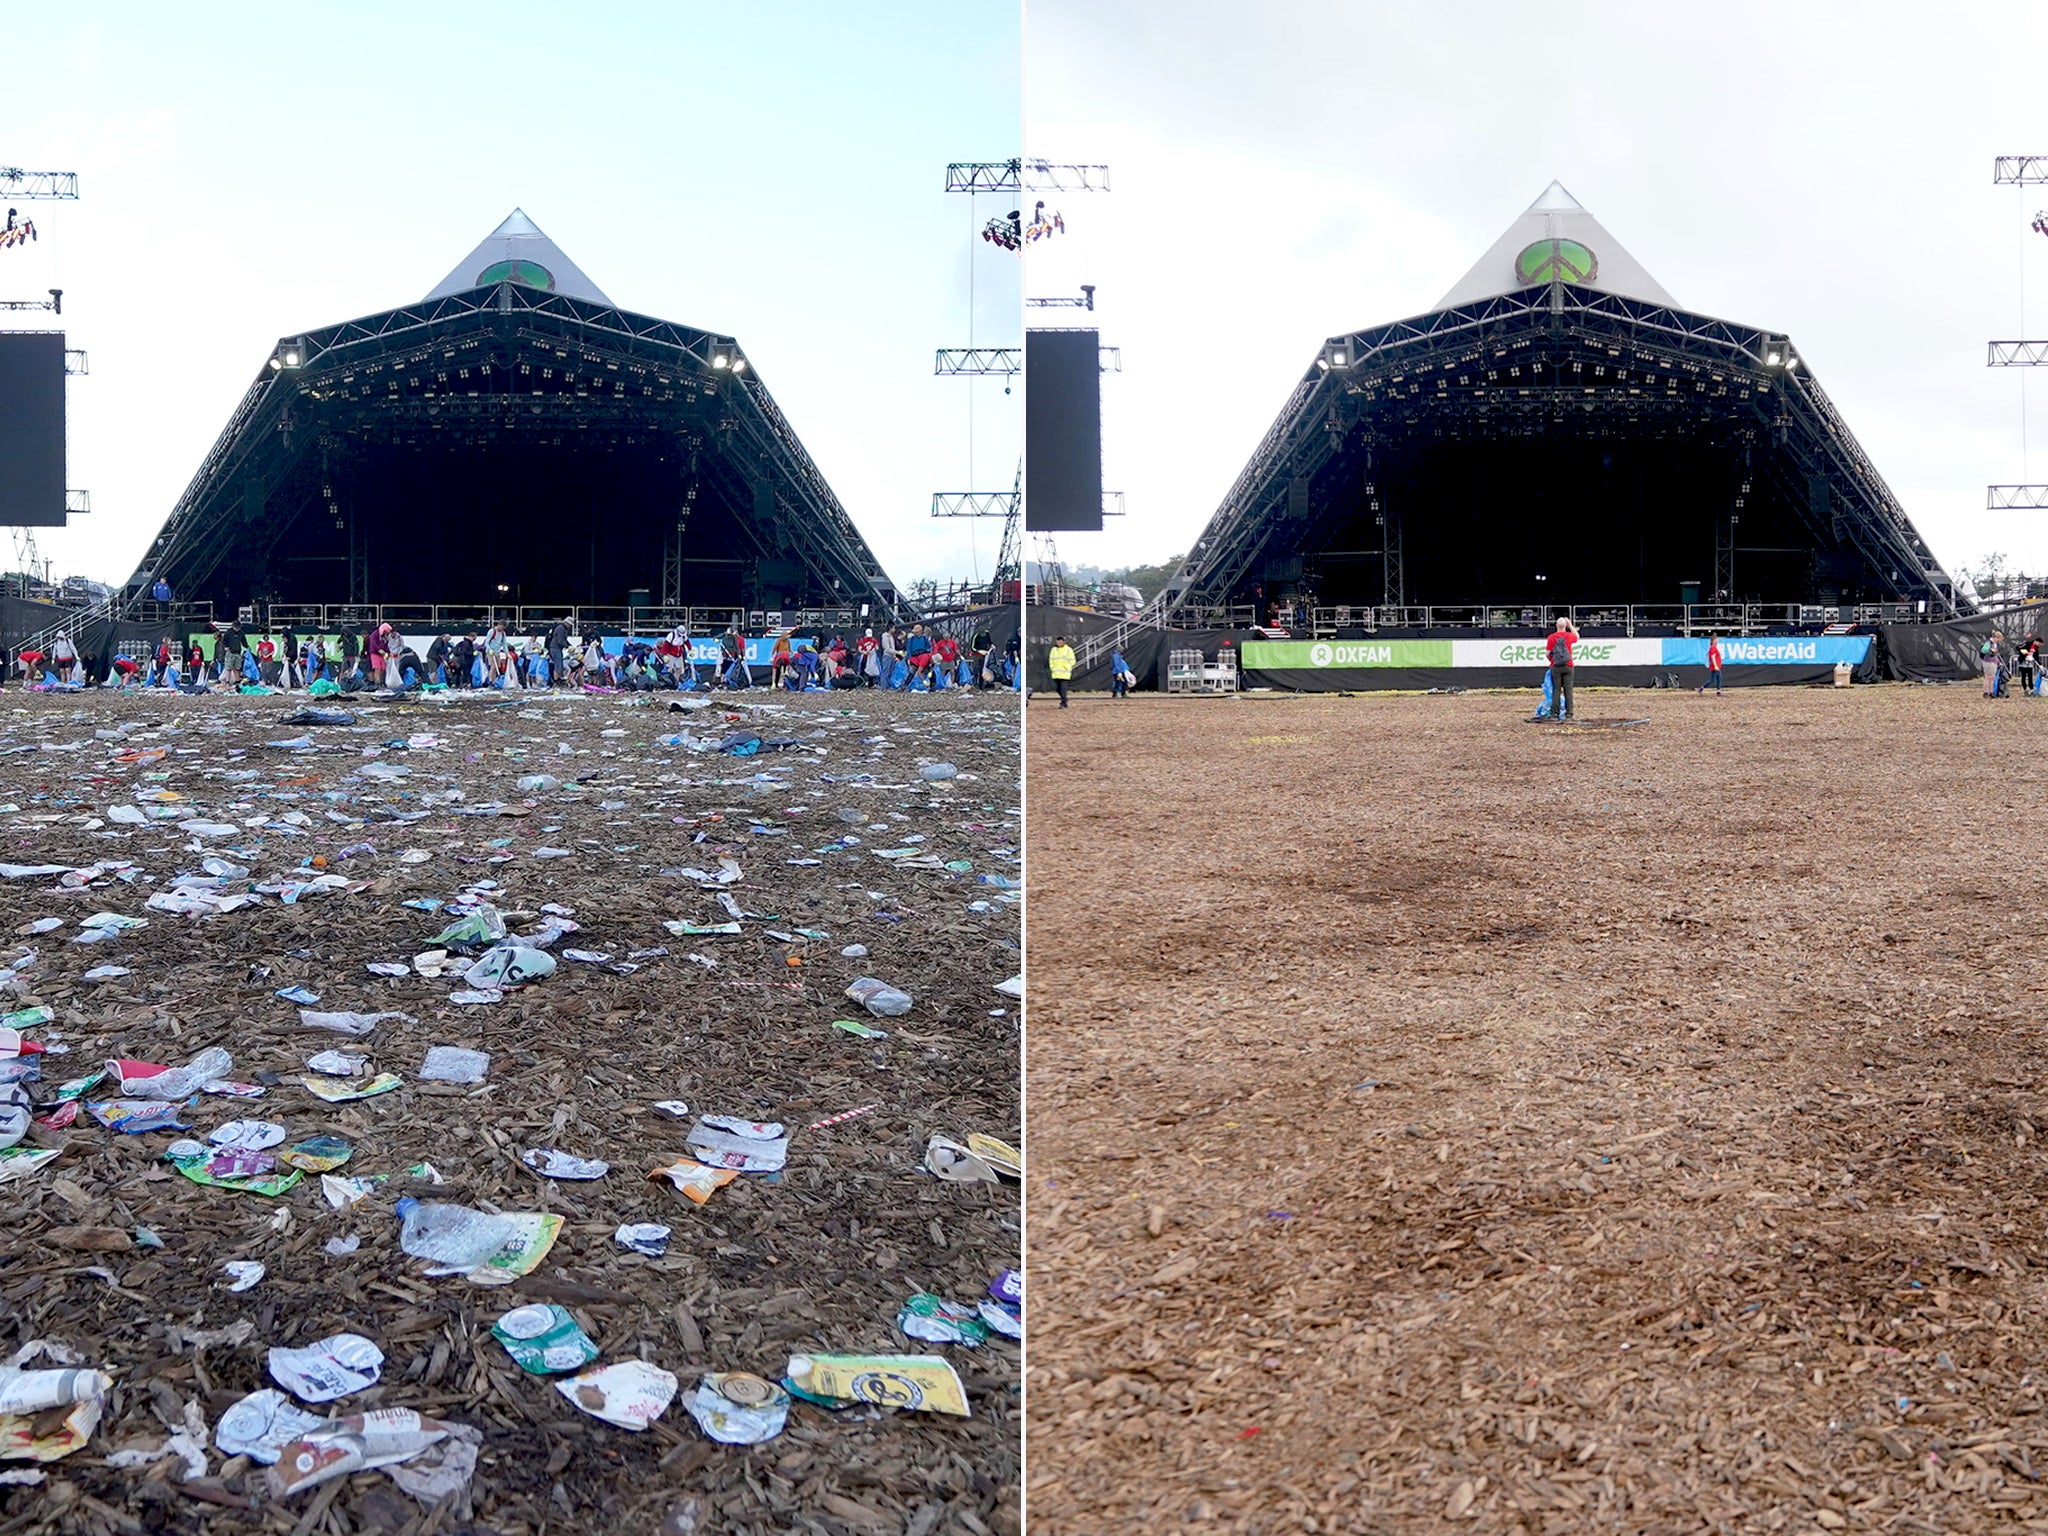 Before and after the grounds are cleared in front of the Pyramid Stage at Glastonbury